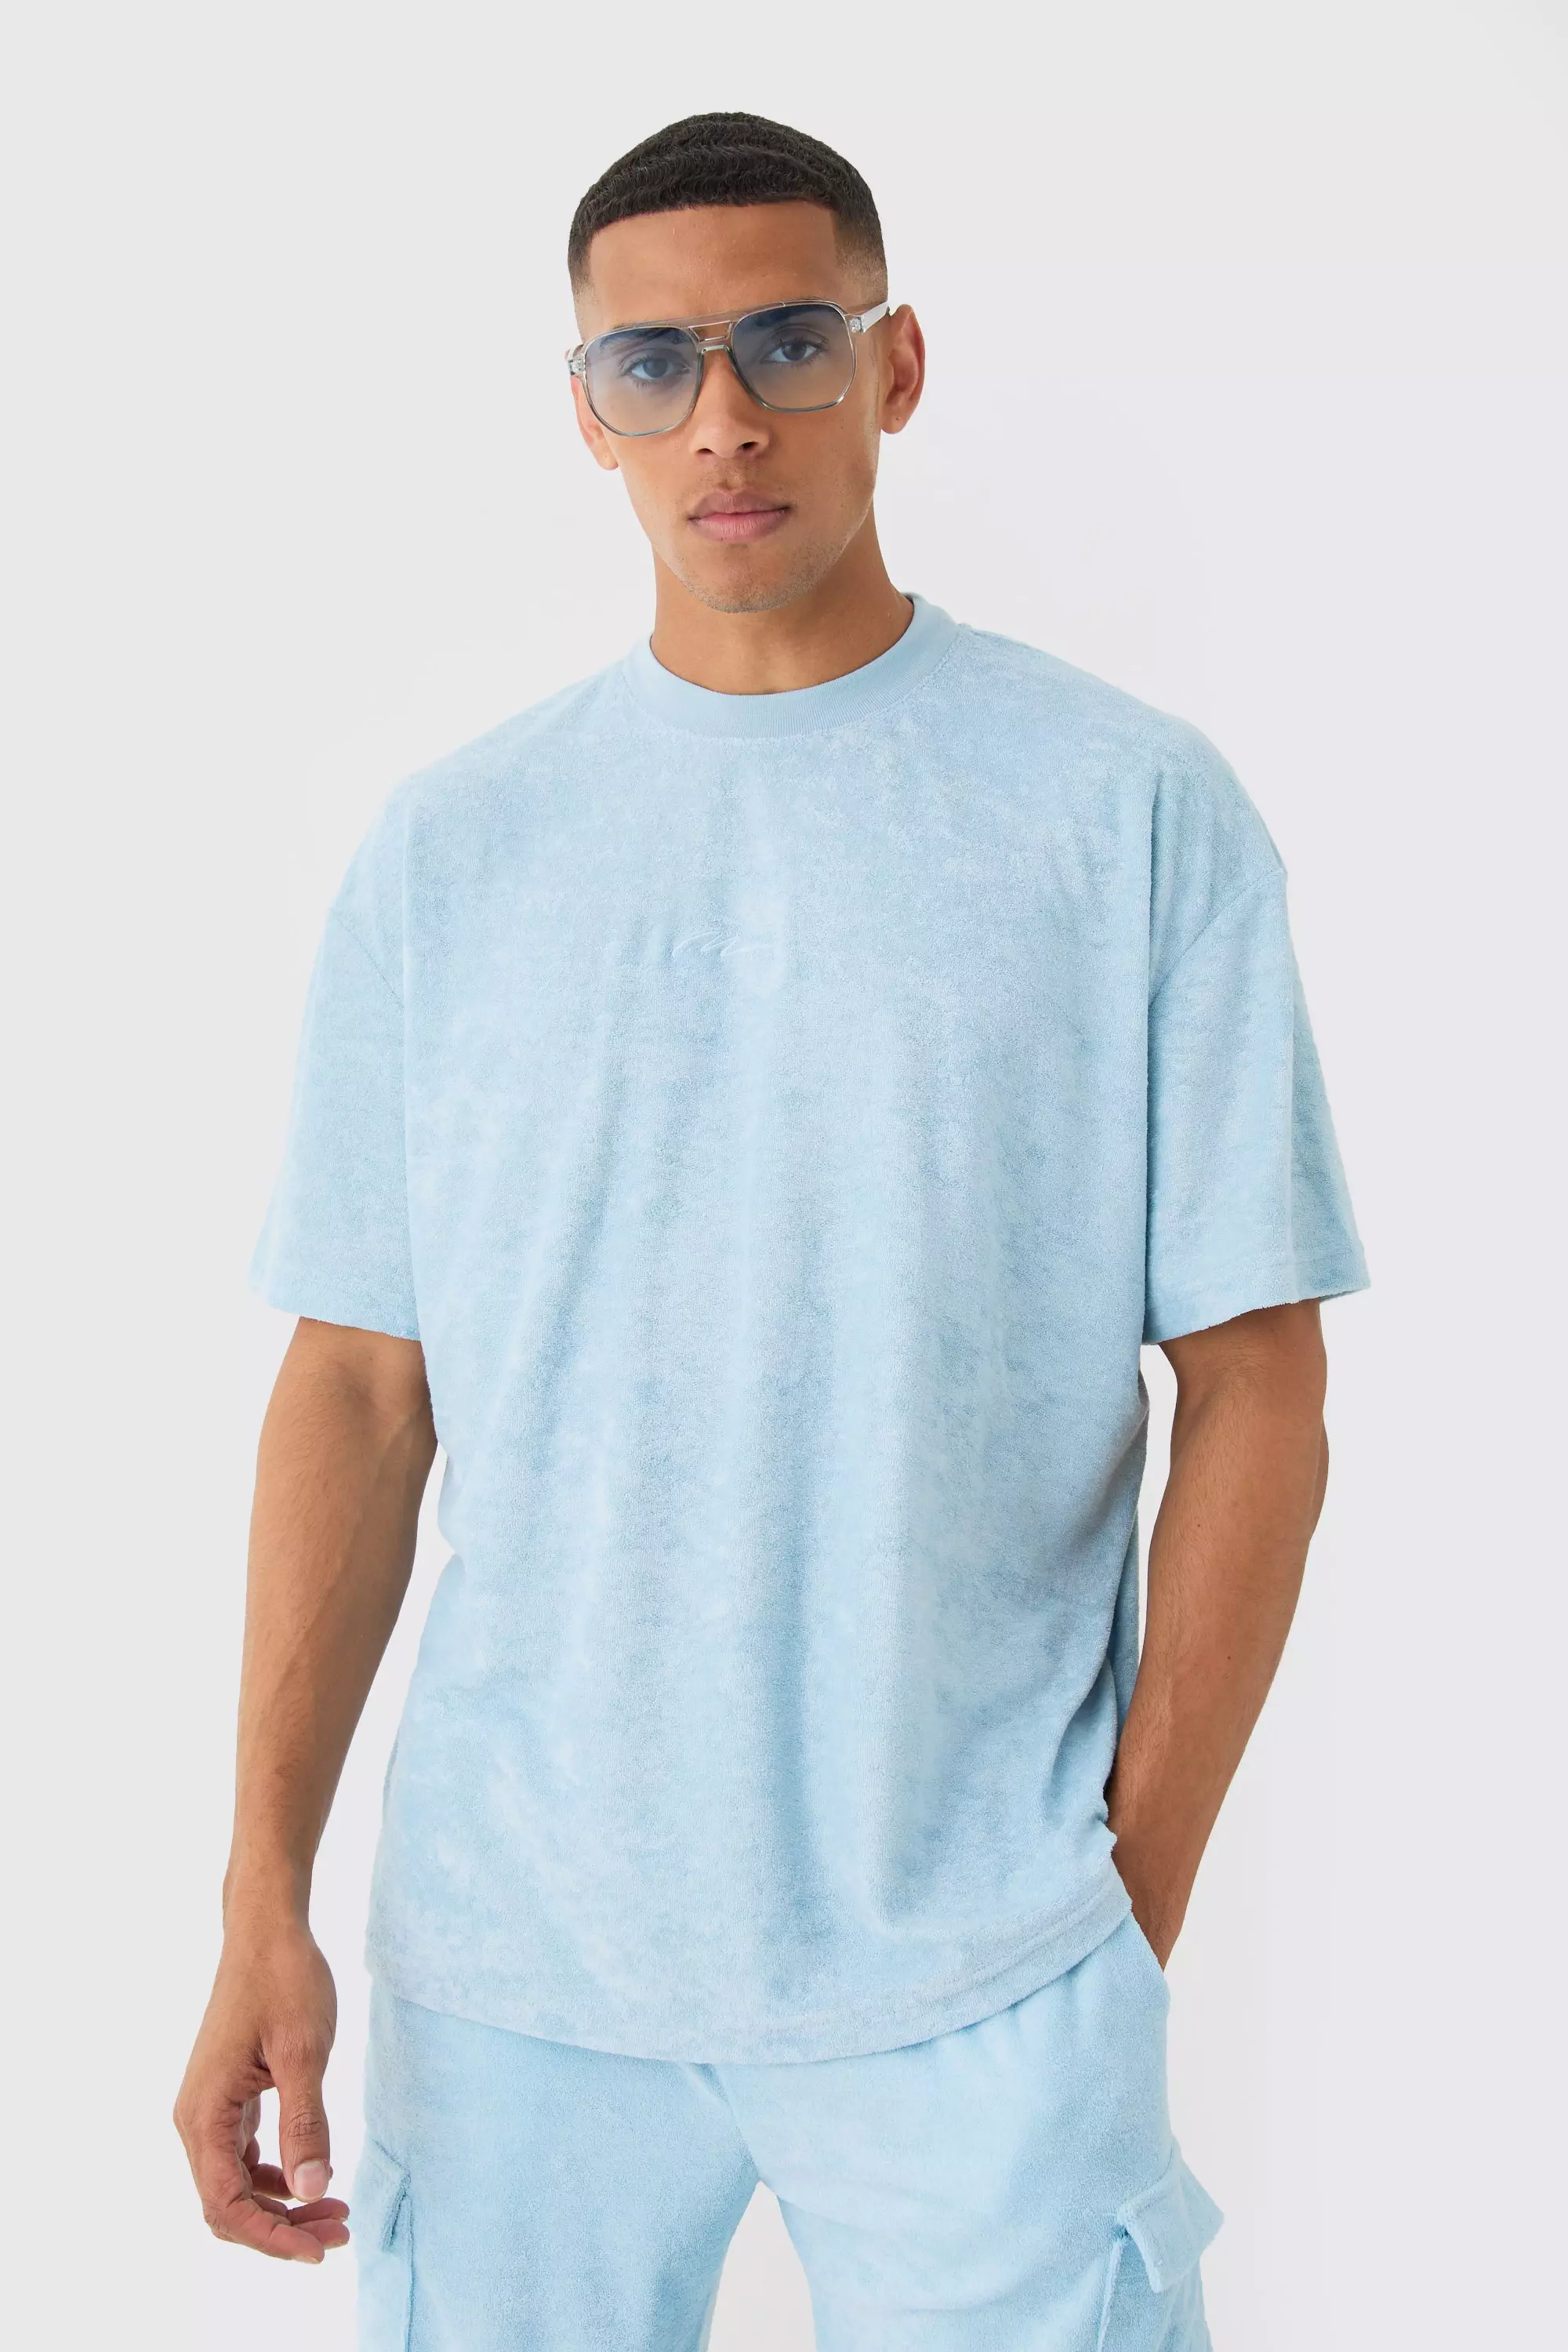 Blue Oversized Extended Neck Towelling Man Signature T-shirt